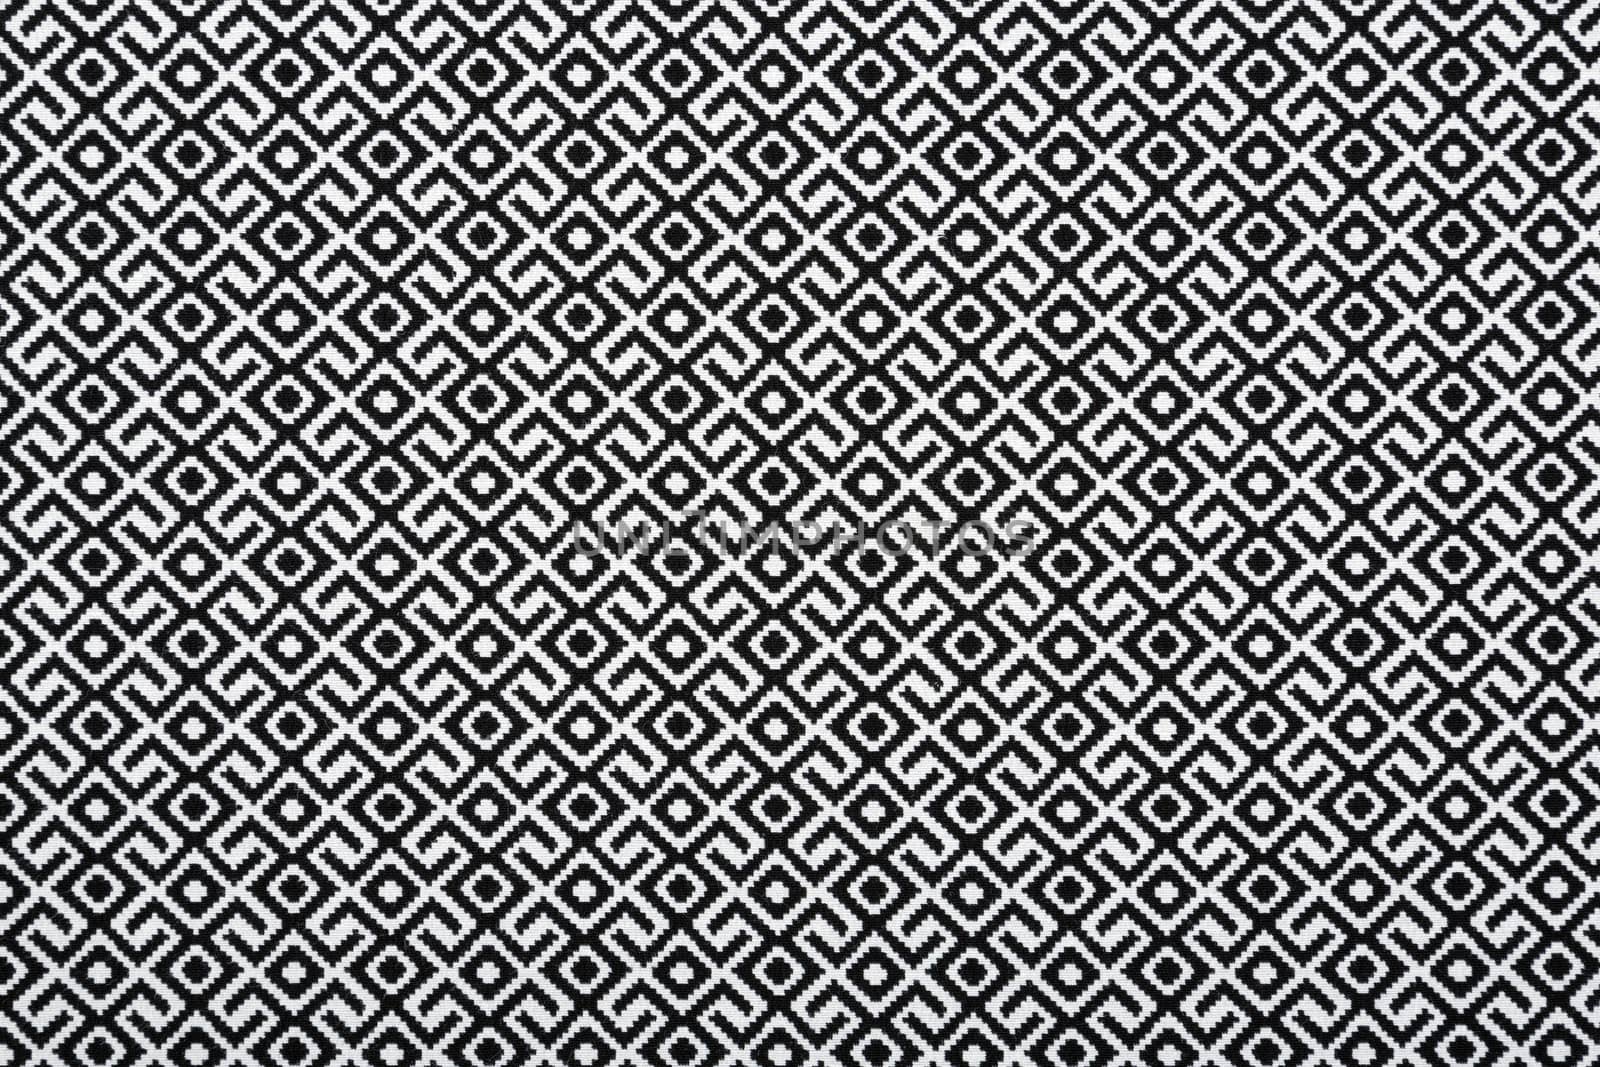 Material in geometric patterns, a textile background.